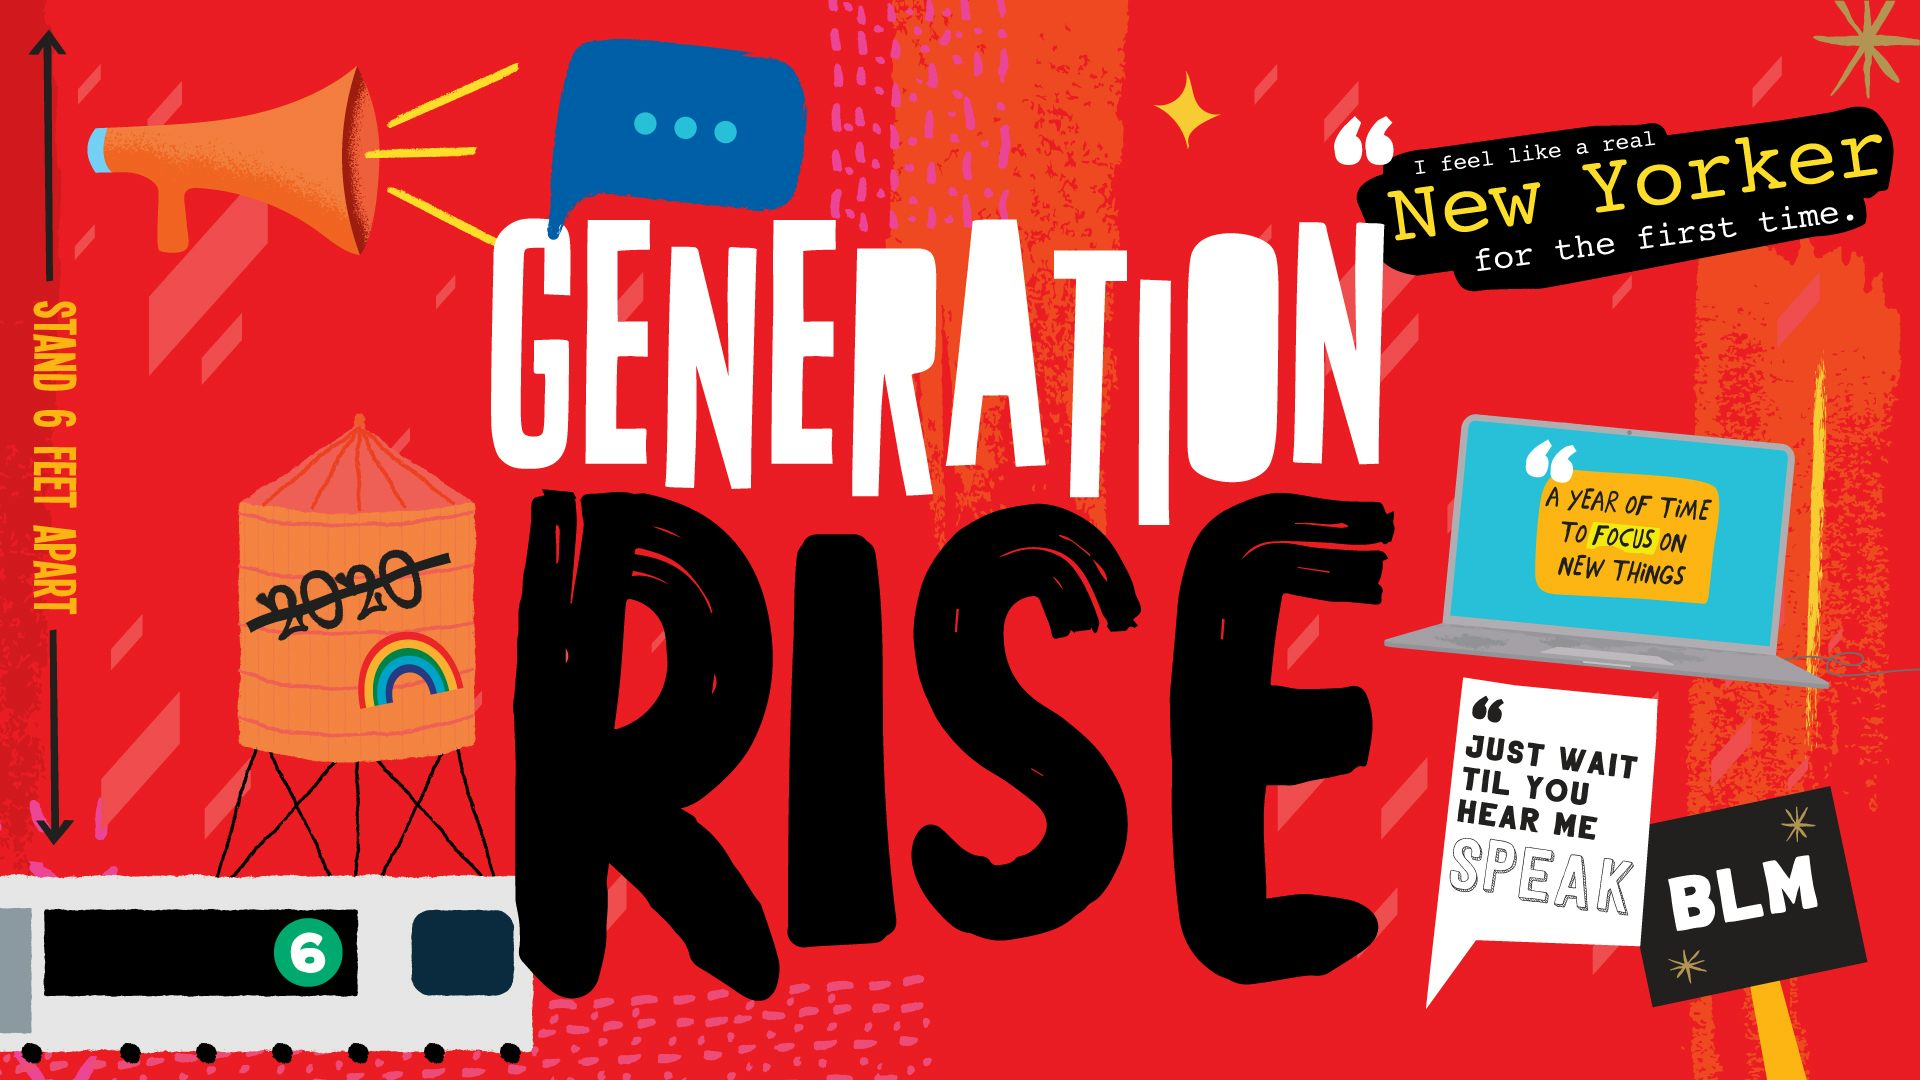 Generation Rise title illustration featuring subway, protest signs and symbols of NYC on a red background